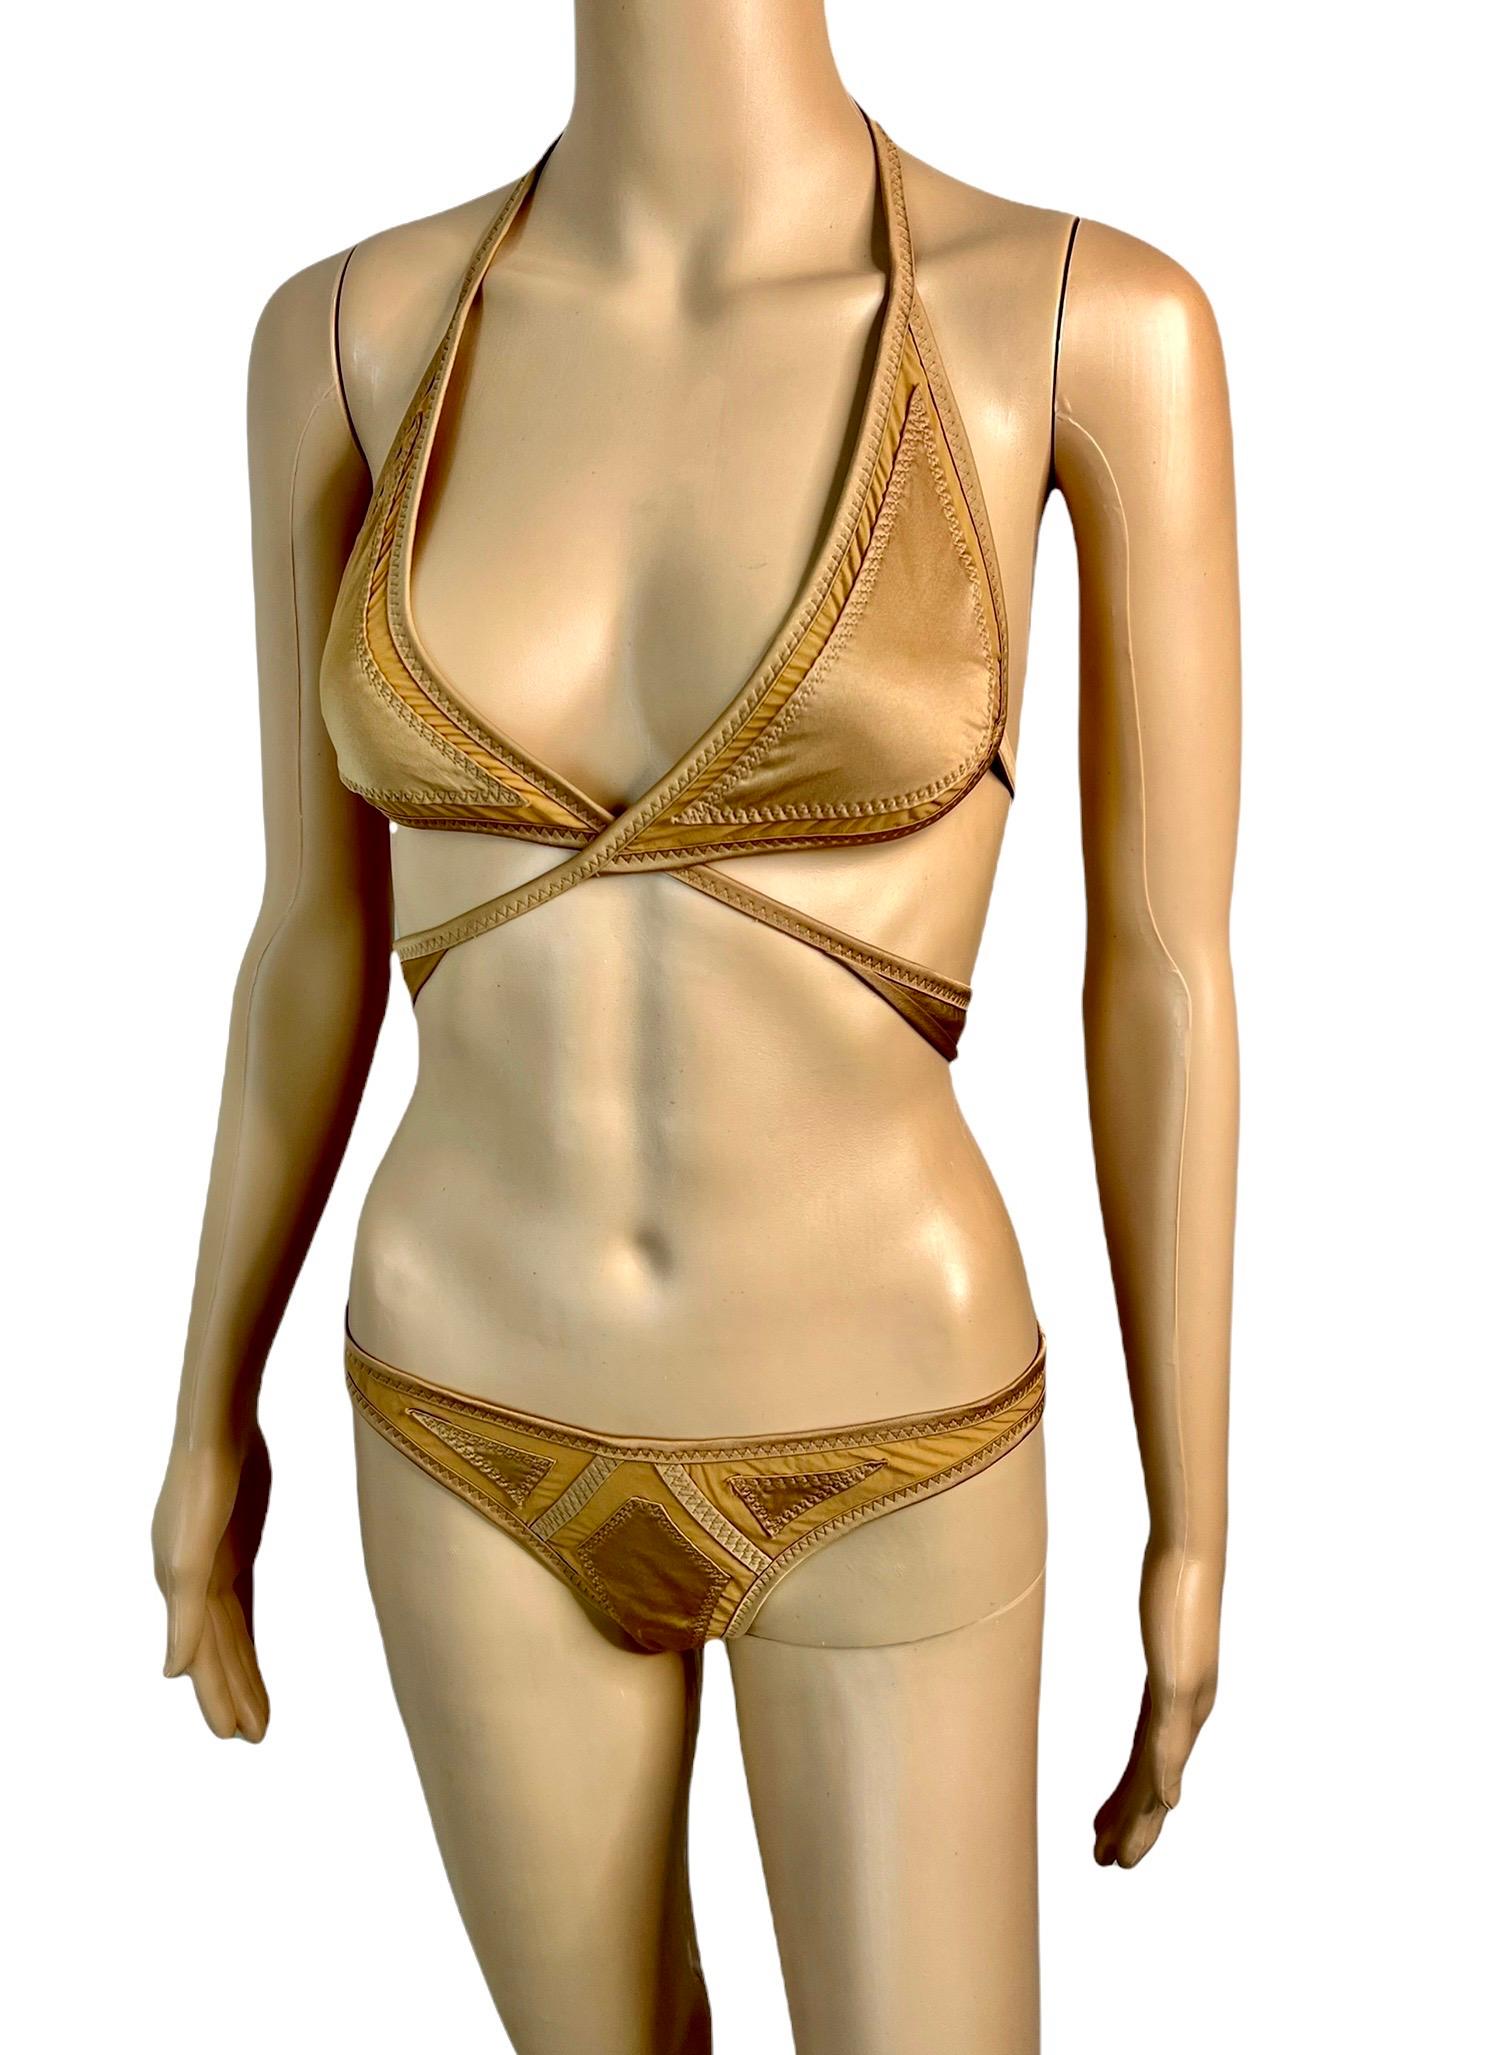 Gucci S/S 2005 Runway Cutout Sheer Panels Two-Piece Bikini Swimsuit Swimwear Size S

Look 27 from the Spring 2005 Collection.

Excellent Condition